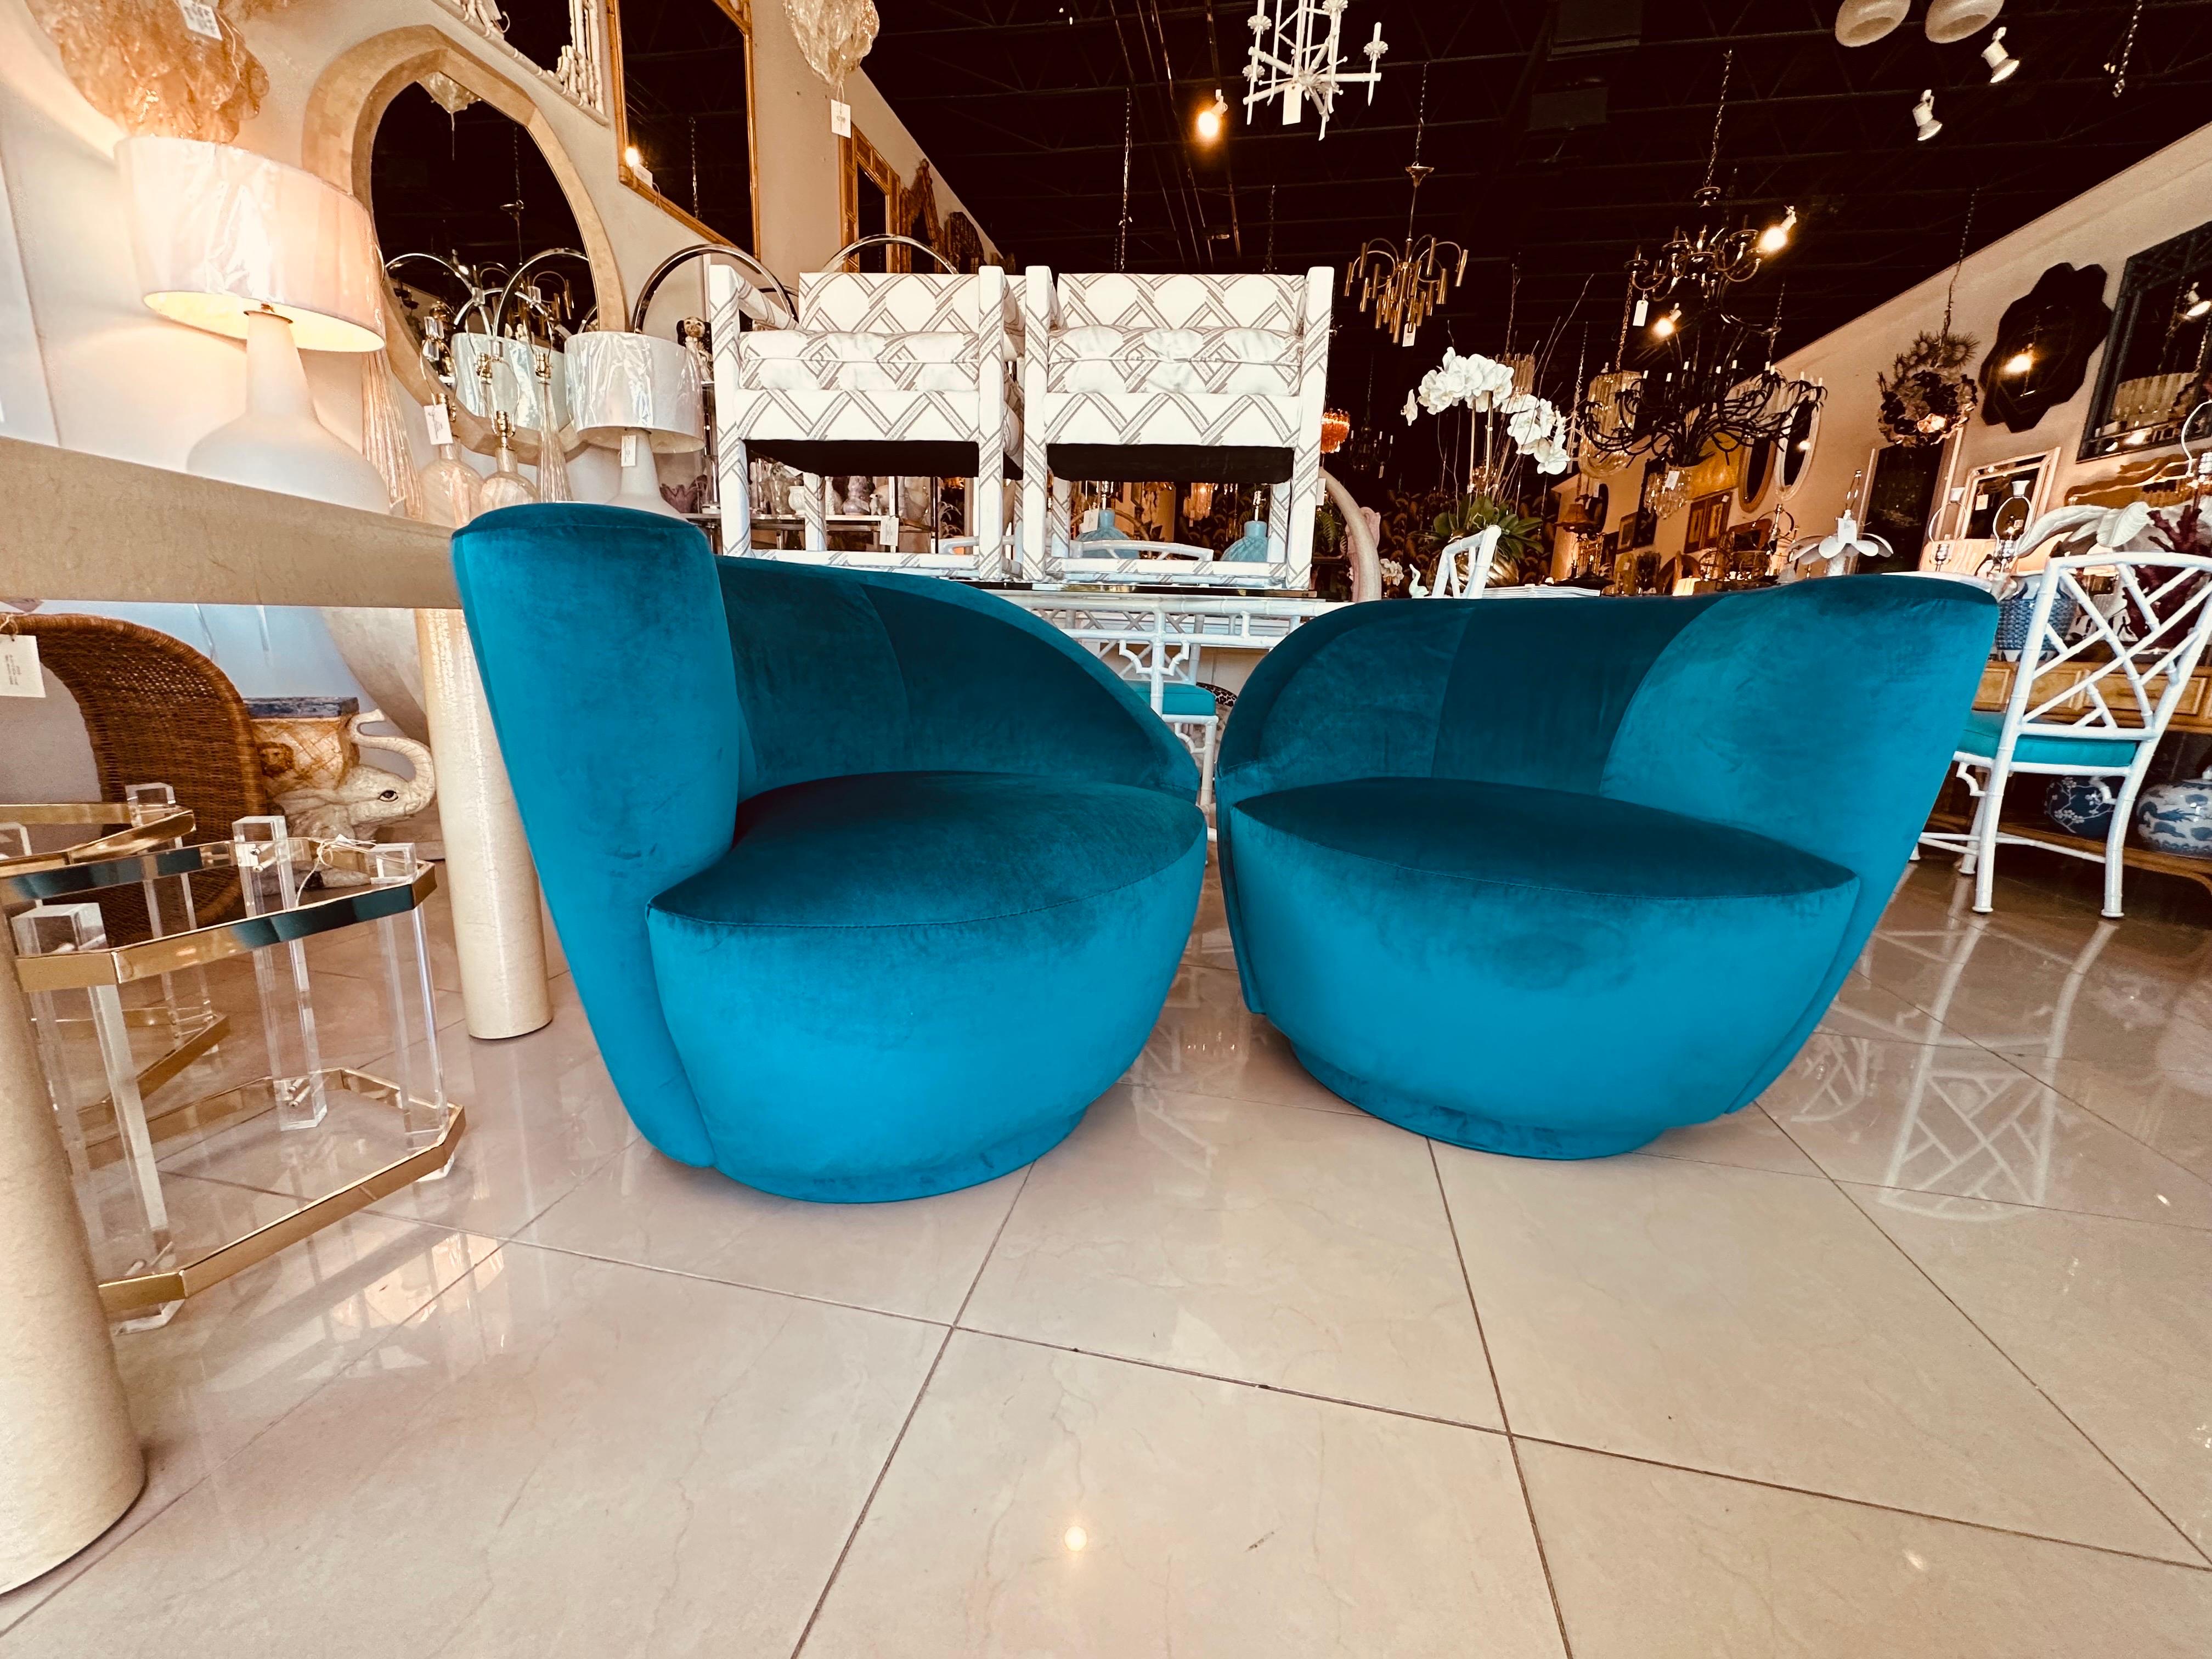 Amazing pair of Vladimir Kagan for Directional swivel arm chairs, nautilus corkscrew design. These have been newly upholstered in a beautiful teal blue velvet. Dimensions: 29 H x 34.5 W x 16 seat height x 22 cushion depth x 34 overall depth.